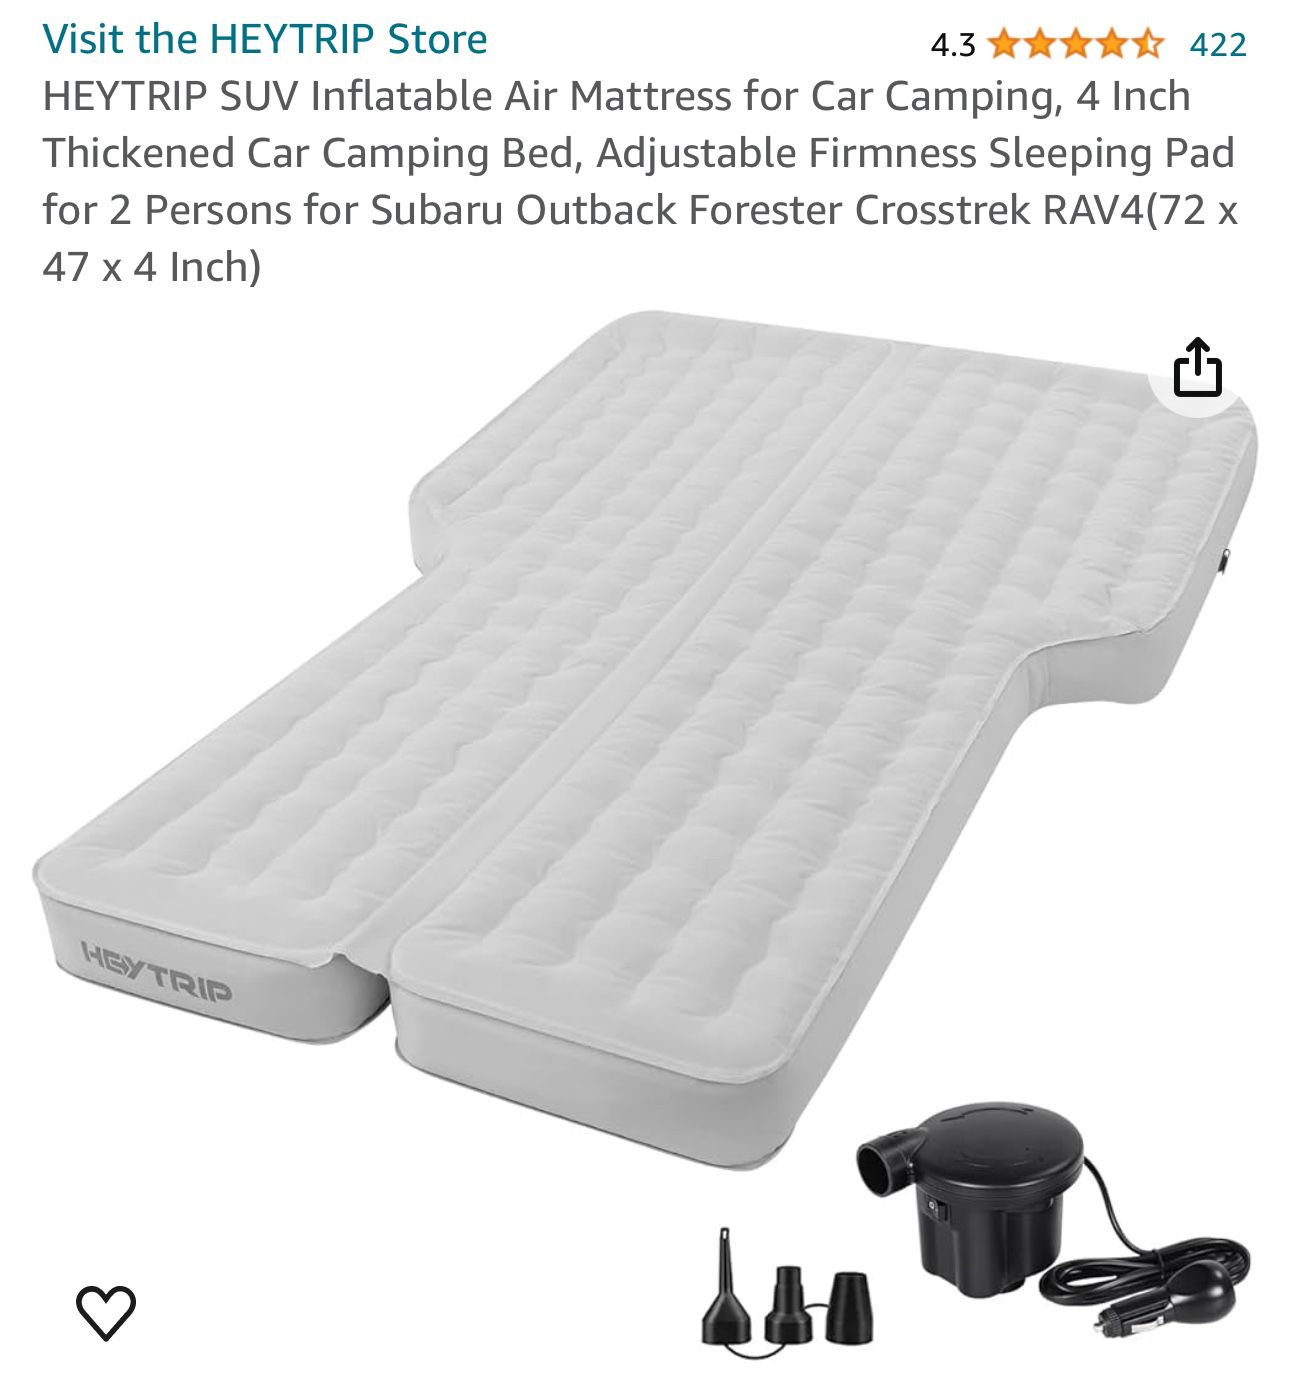 HEYTRIP SUV Inflatable Air Mattress for Car Camping, 4 Inch Thickened Car Camping Bed